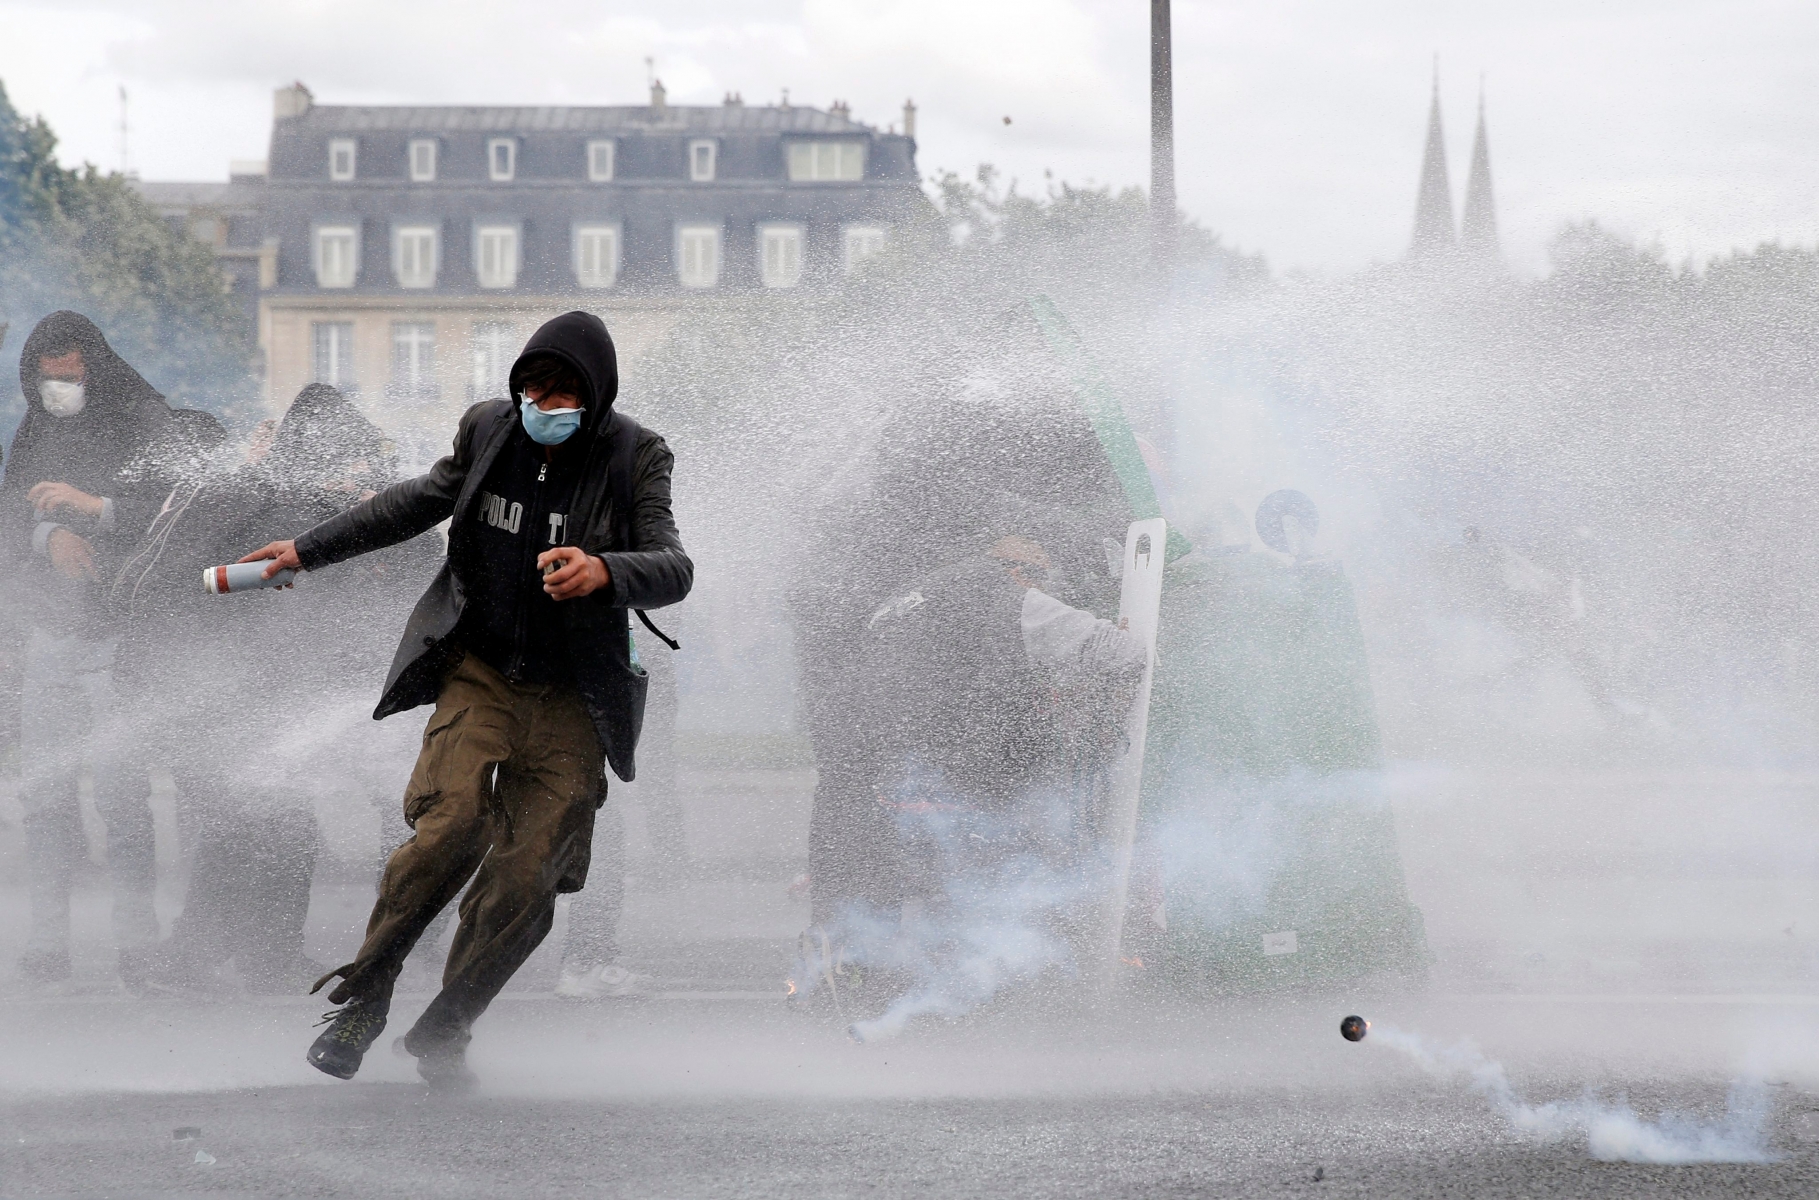 epa05364375 A protester runs from the scene as others duck behind a toppled garbage container as they protect themselves from water cannons used by riot police to disperse the crowd during a national demonstration and strike against the Labor Law reform in Paris, France, 14 June 2016. Labor unions demonstrated during a national strike across France to protest against about employment law reforms in the so-called El Khomri bill.  EPA/YOAN VALAT FRANCE LABOUR PROTEST